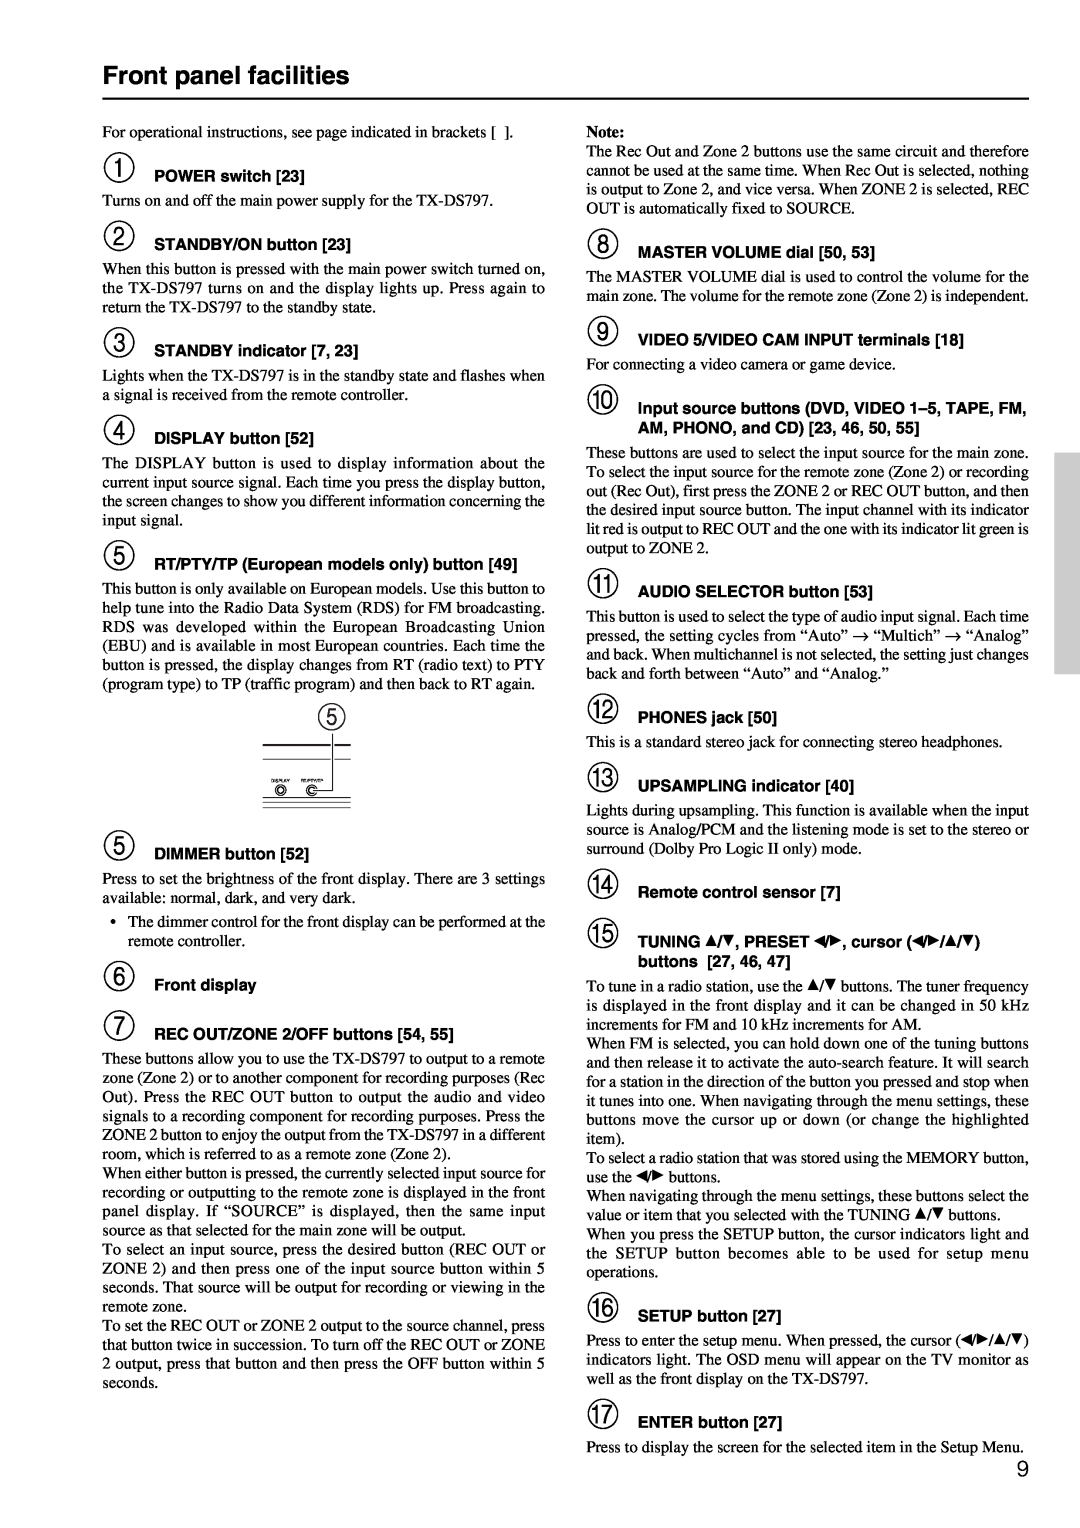 Onkyo TX-DS797 instruction manual Front panel facilities 